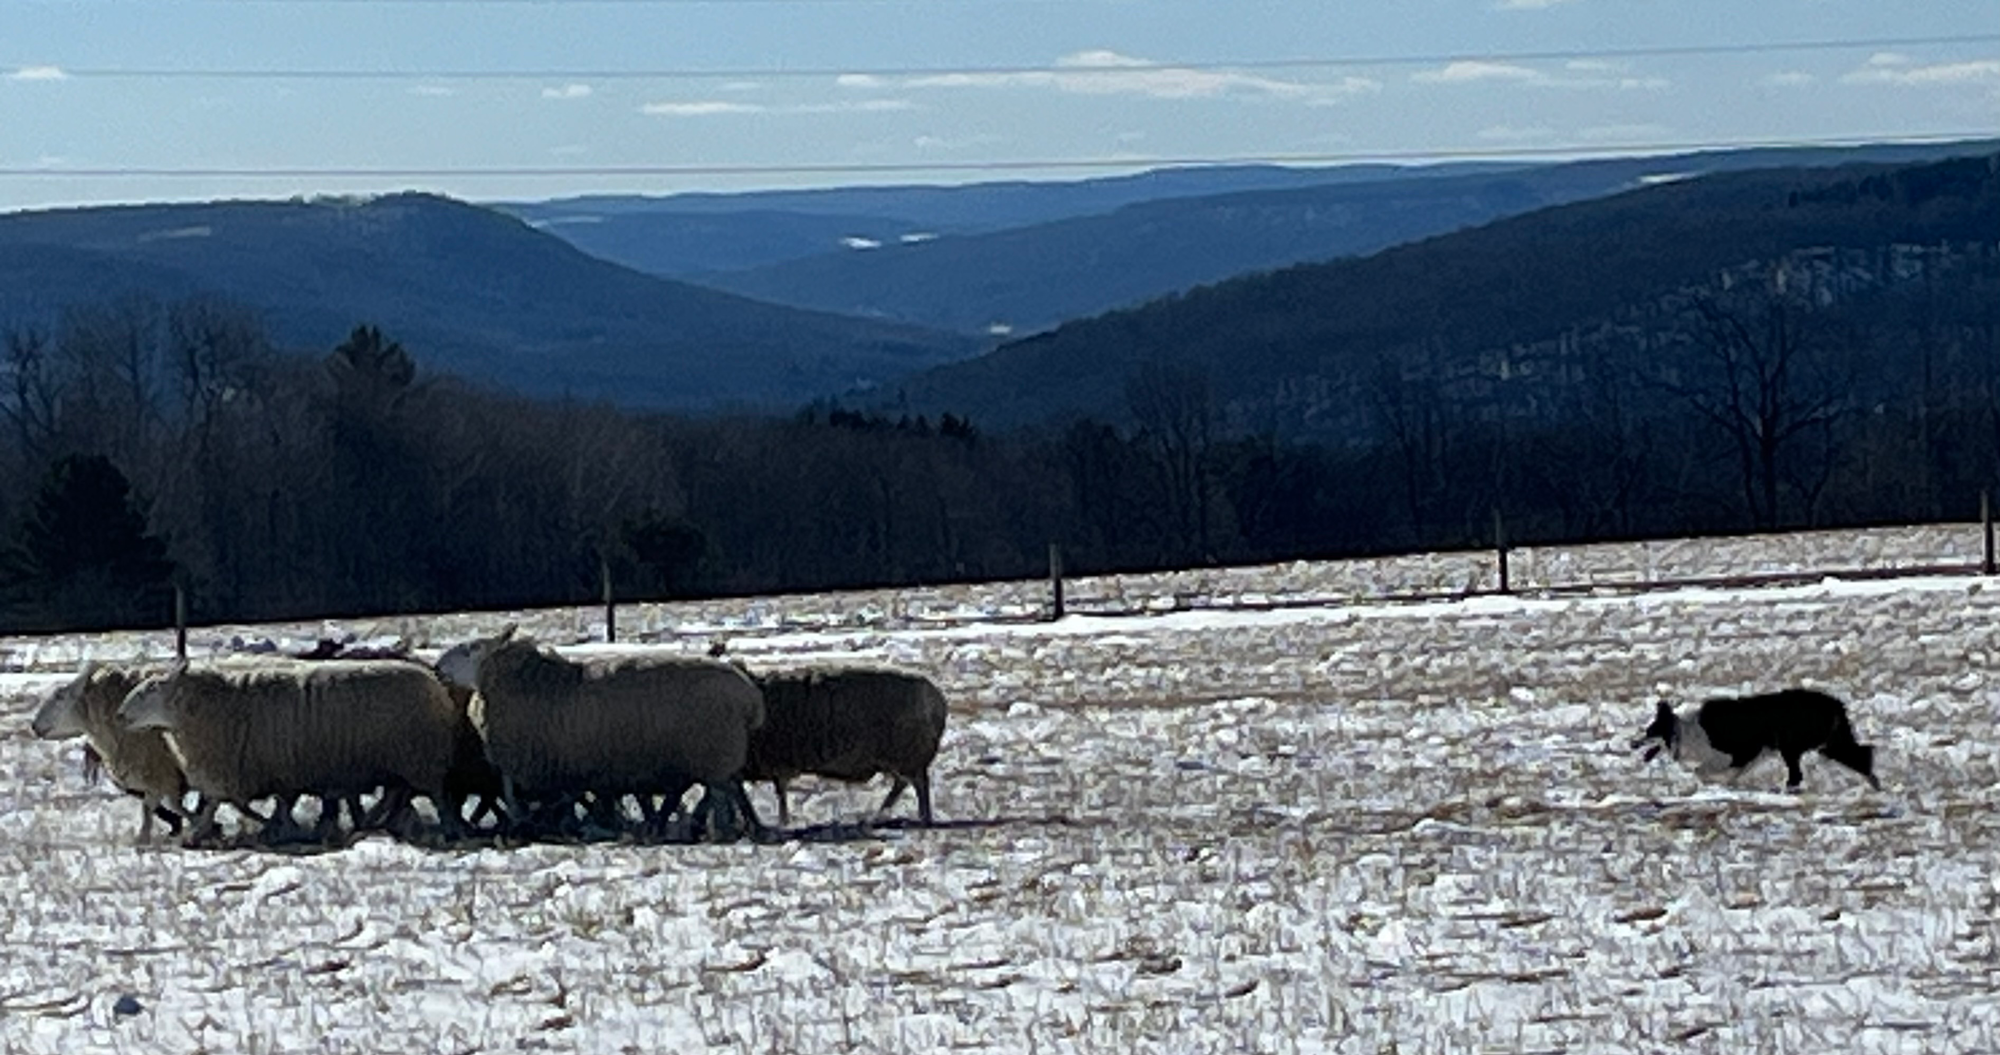 A border collie herding sheep on a snowy hill with a bright blue sky in the background